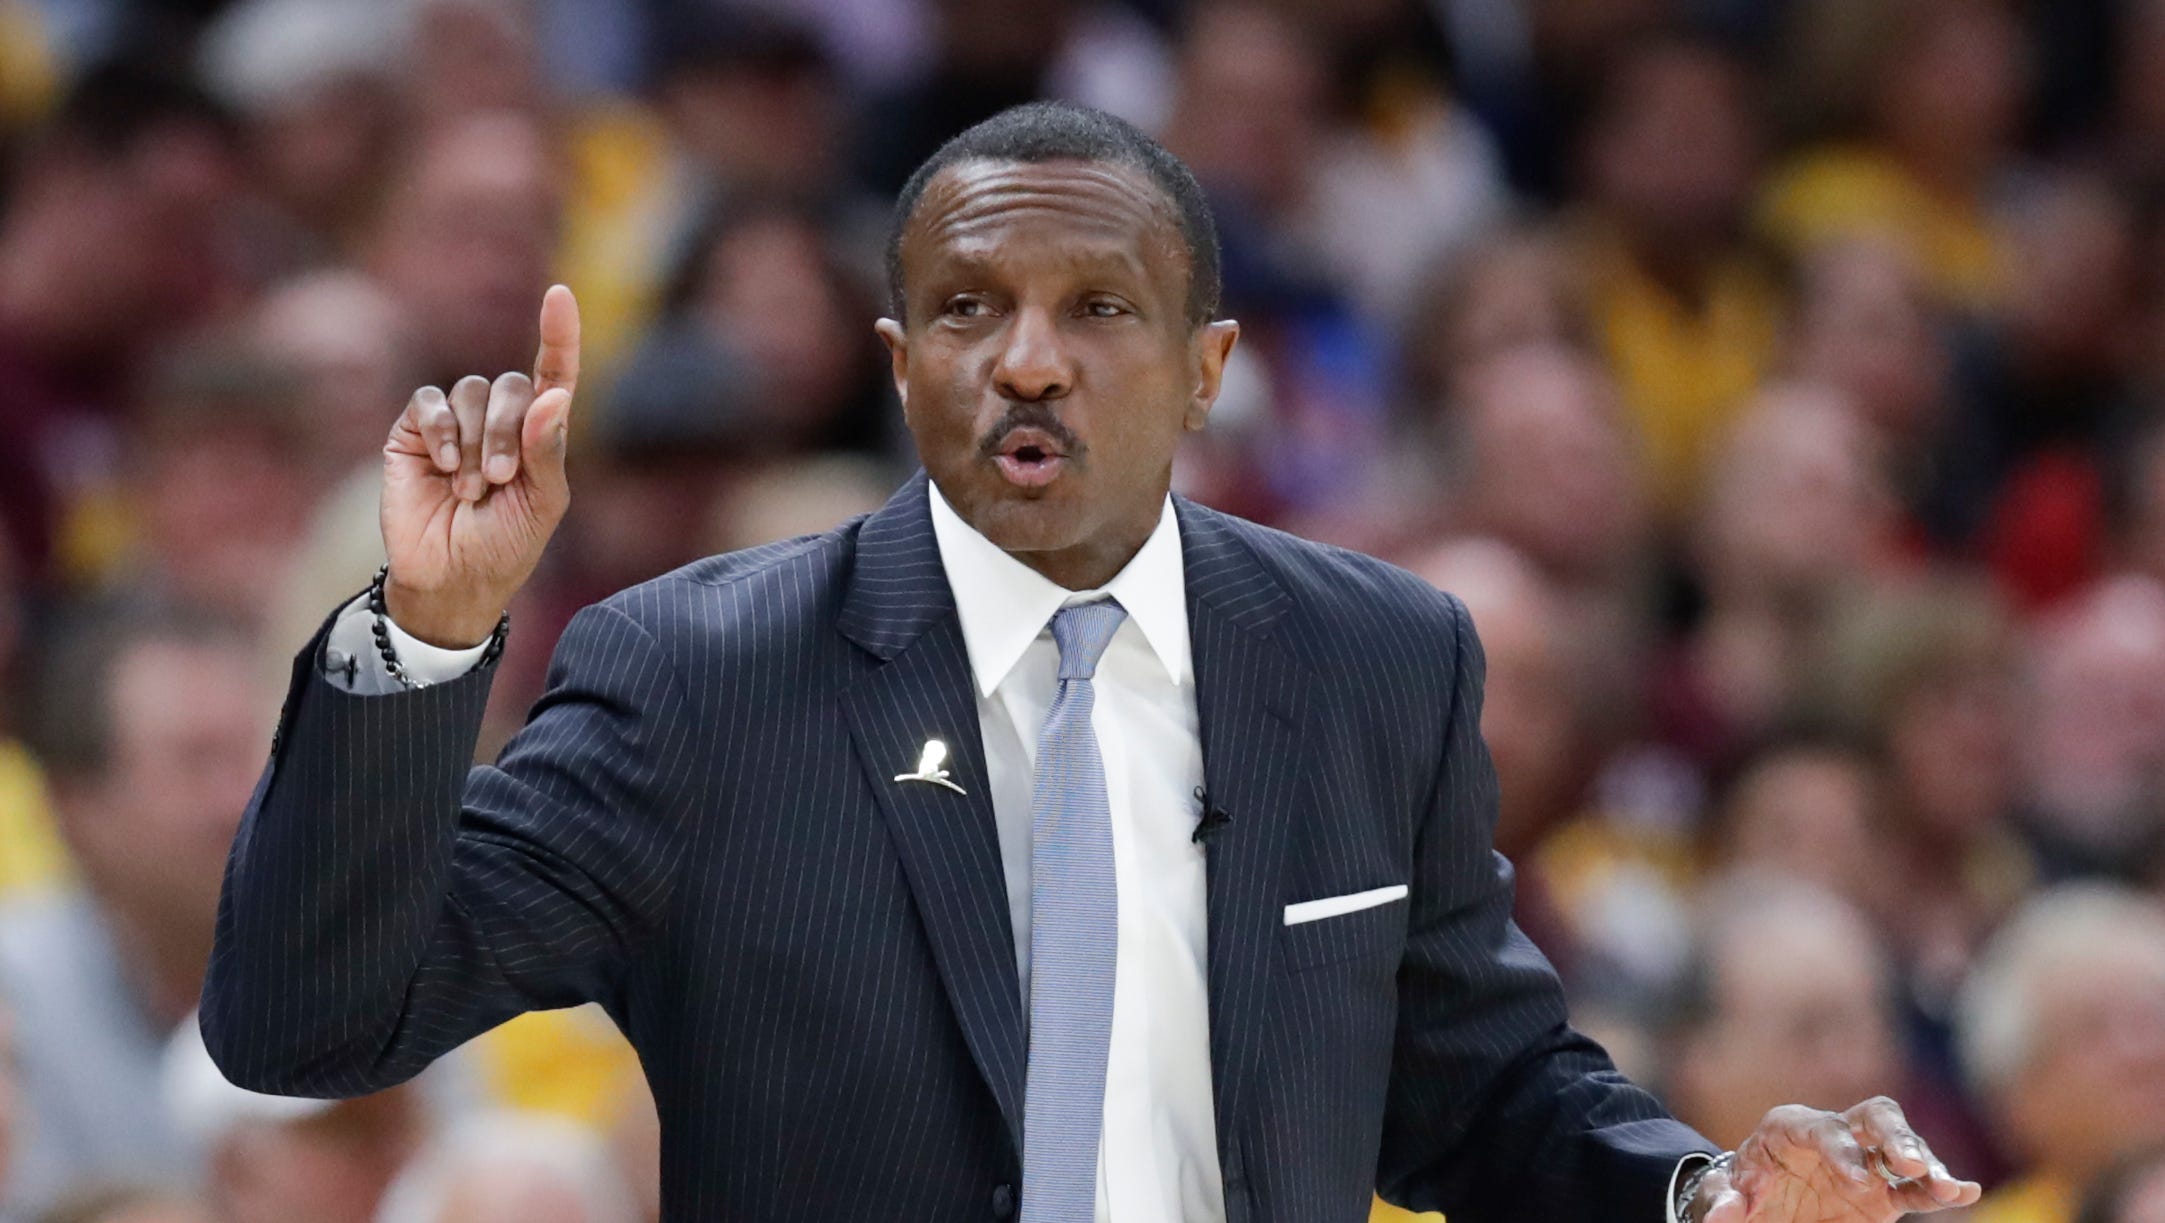 Toronto Raptors head coach Dwane Casey gestures against the Cleveland Cavaliers in the first half of Game 4 of an NBA basketball second-round playoff series, Monday, May 7, 2018, in Cleveland.